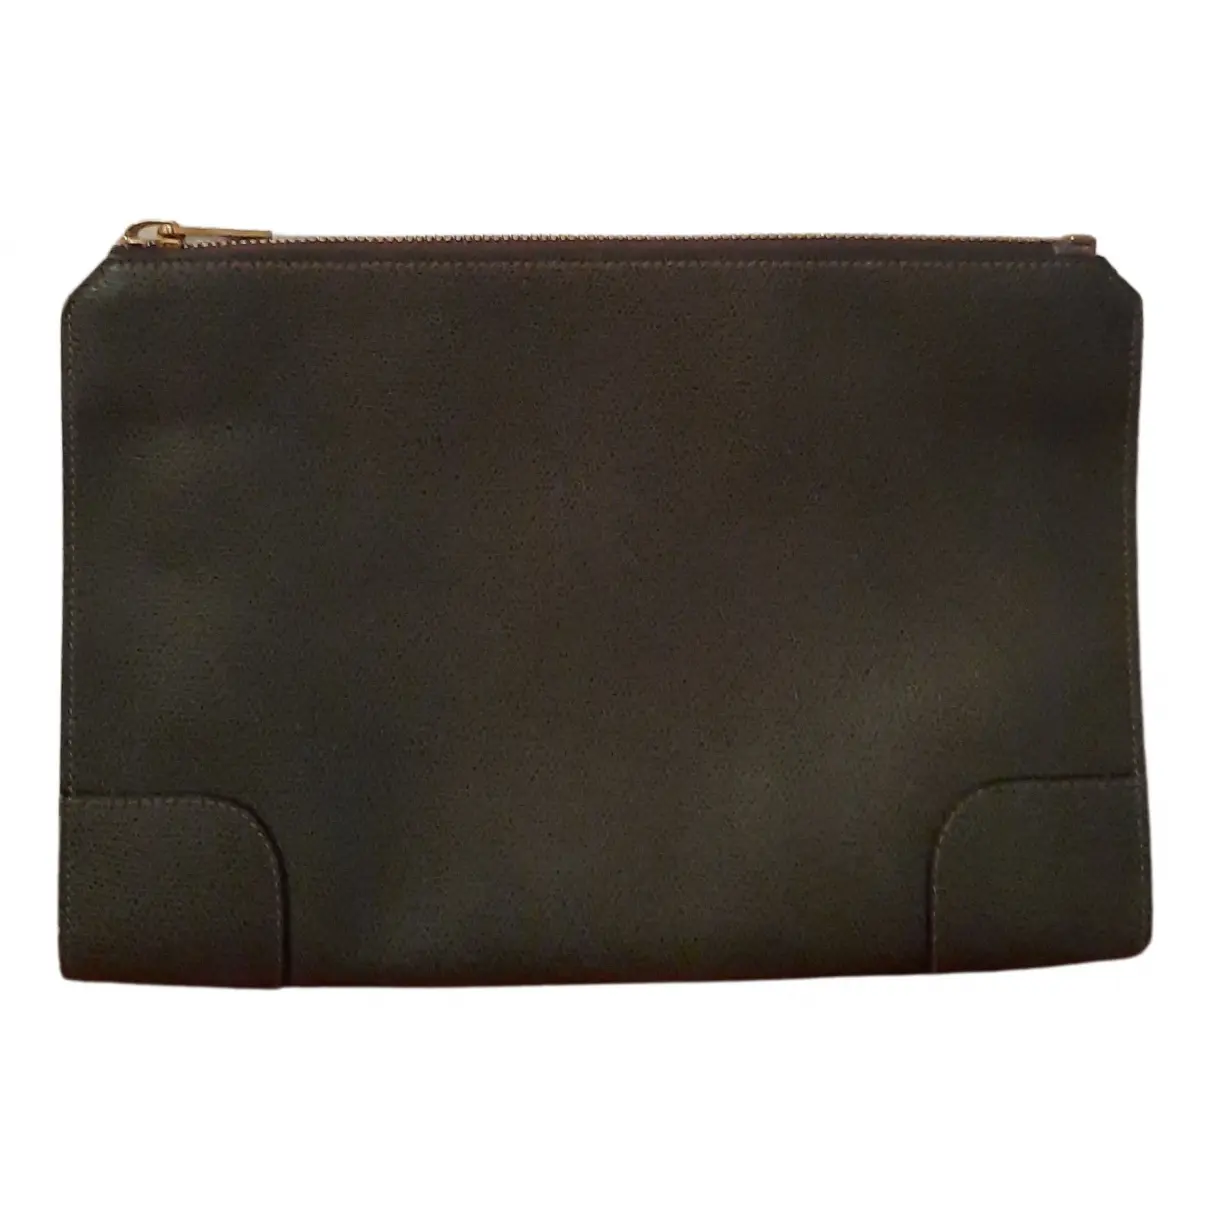 Leather clutch bag Valextra